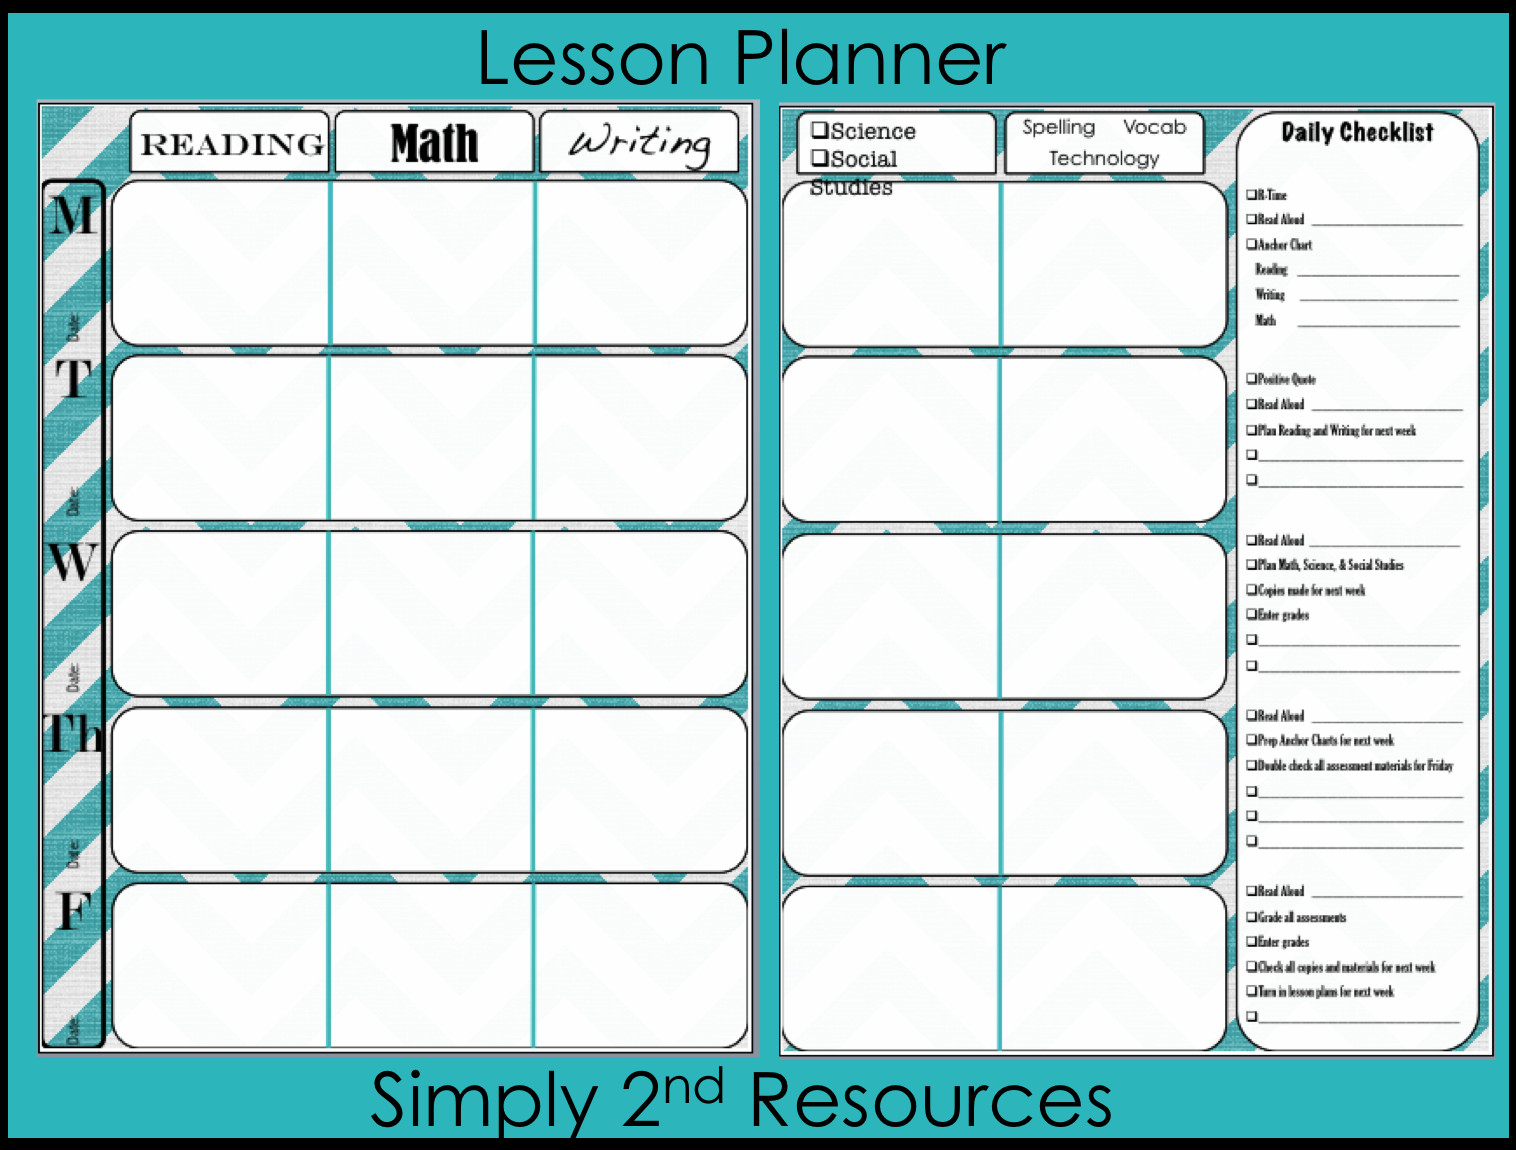 Printable Lesson Plan Template Simply 2nd Resources Lesson Plan Template so Excited to